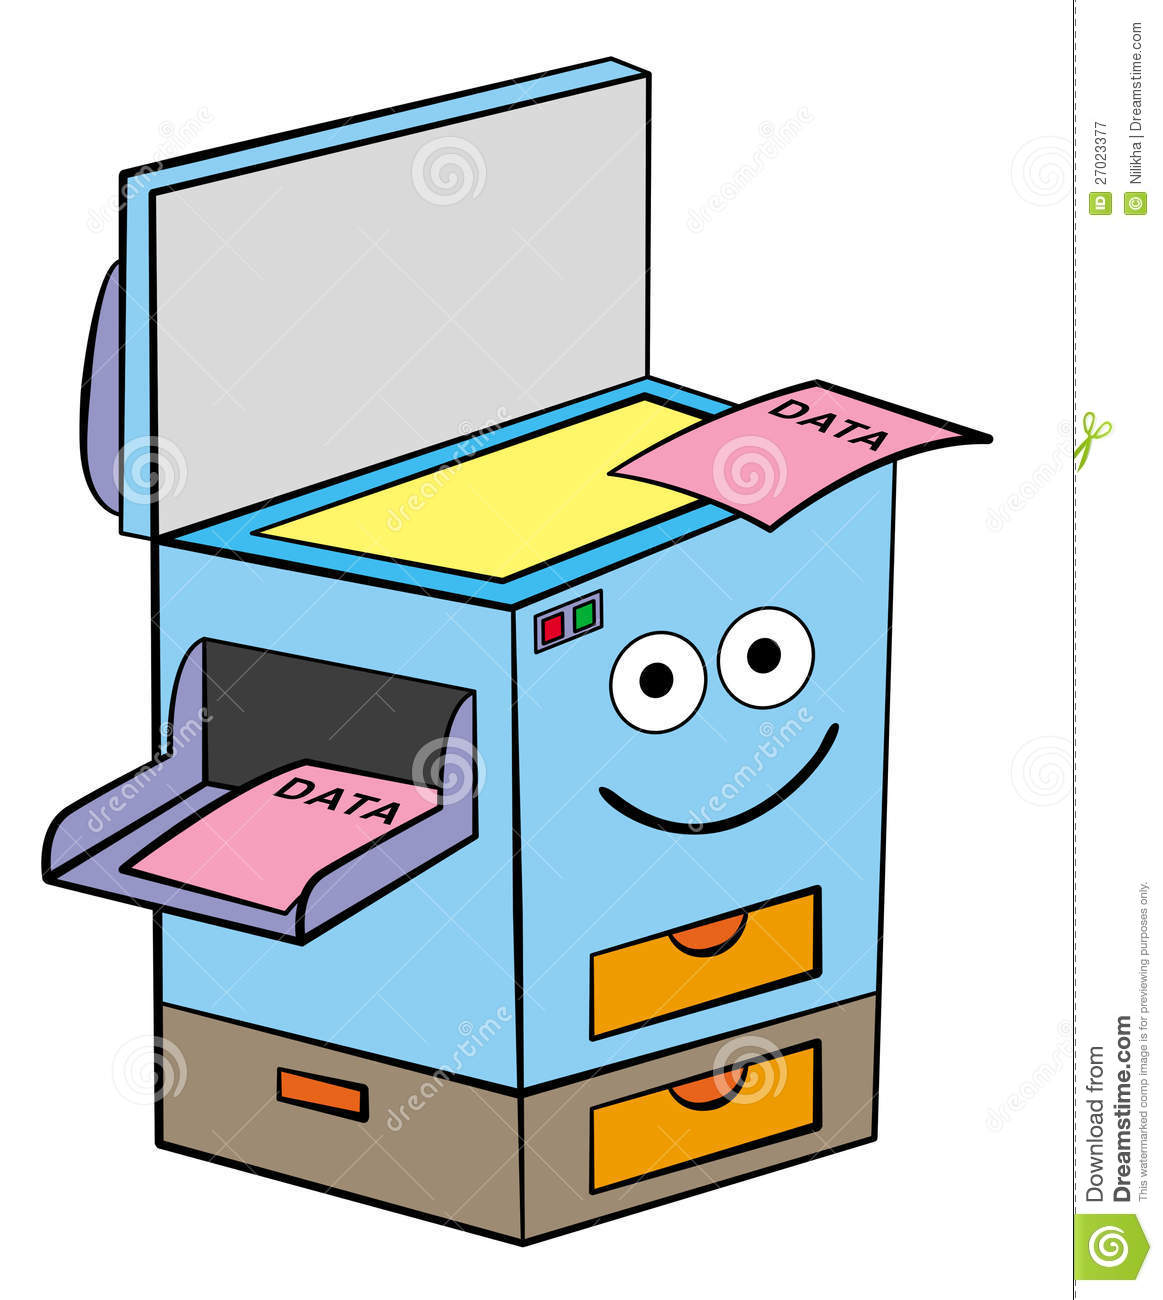 Cartoon Illustration Of A Xerox Machine With A Smiling Face Who Had